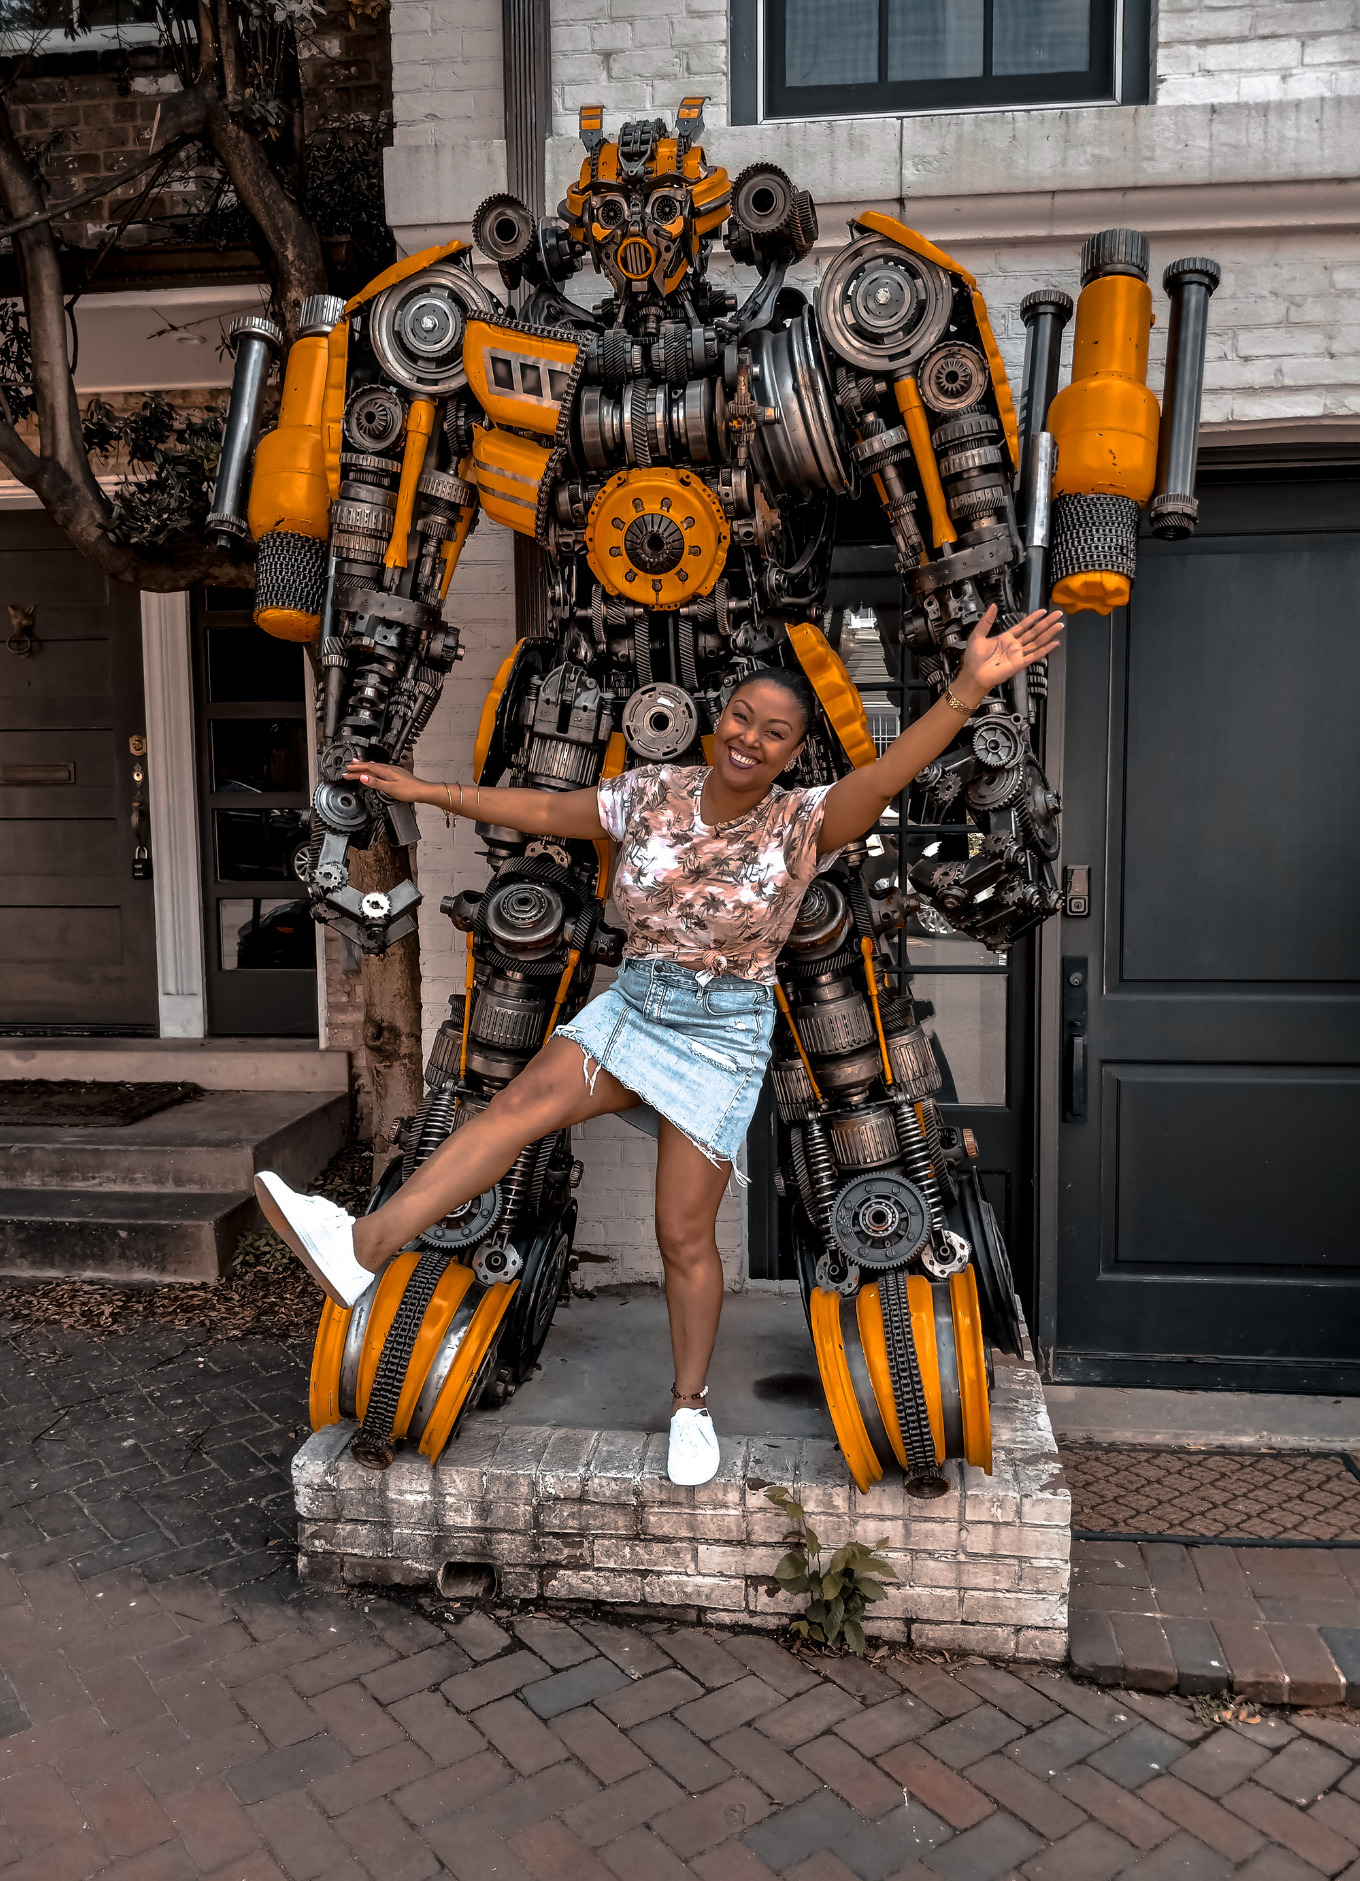 Blogger Rogan Smith smiles and poses in front of the Bumblebee Transformer in Georgetown, DC